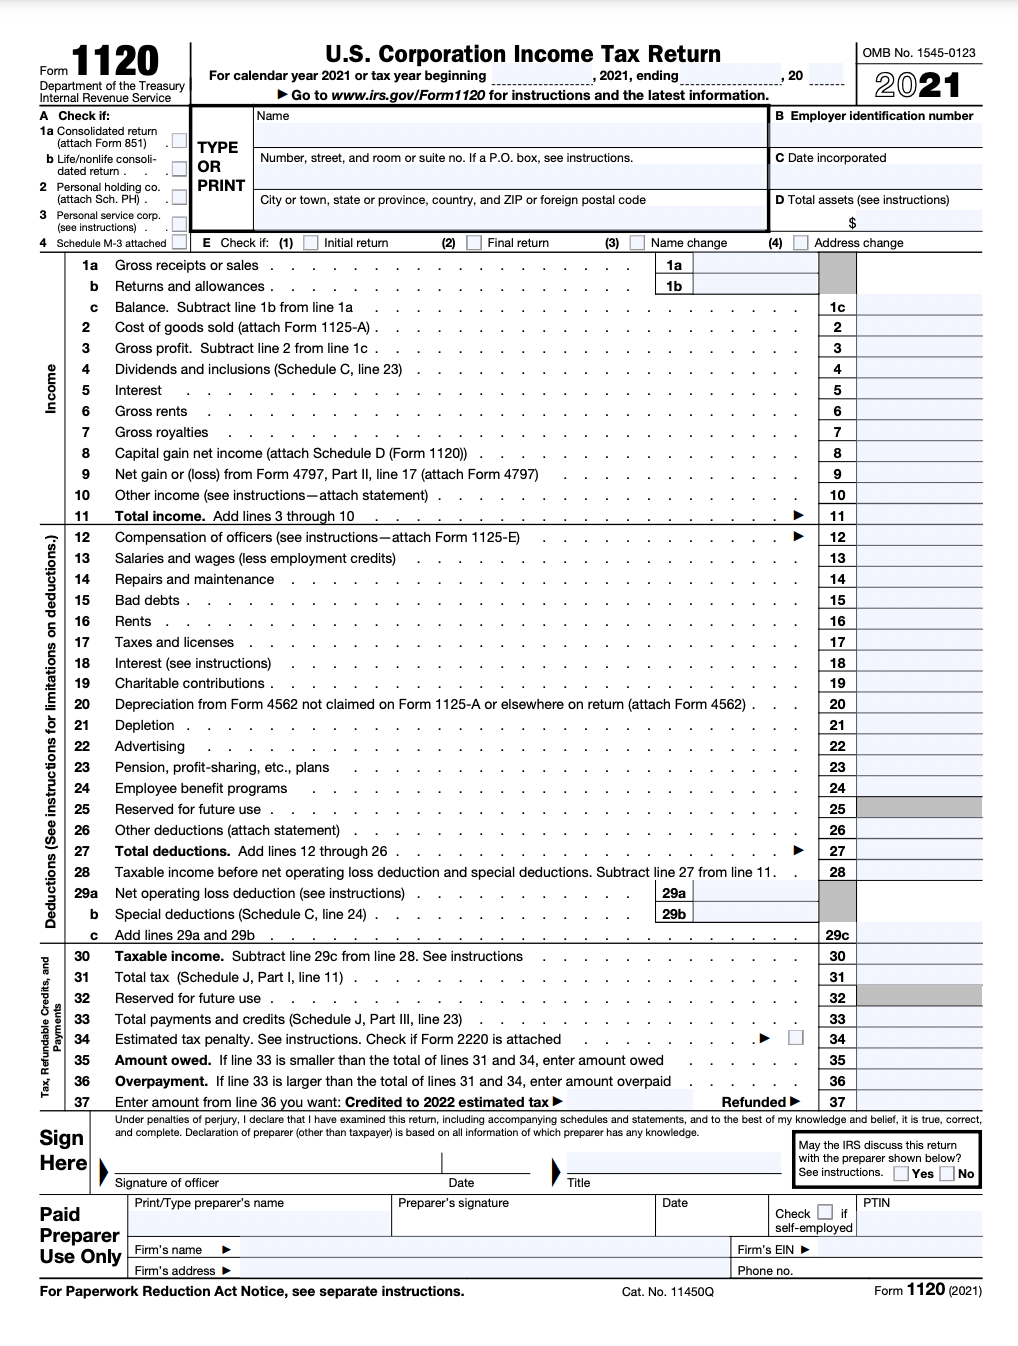 Image of Form 1120 for U.S. Corporation Income Tax Return with instructions and schedules. No relevance to self-employed, 1099, freelancer or personal taxes.